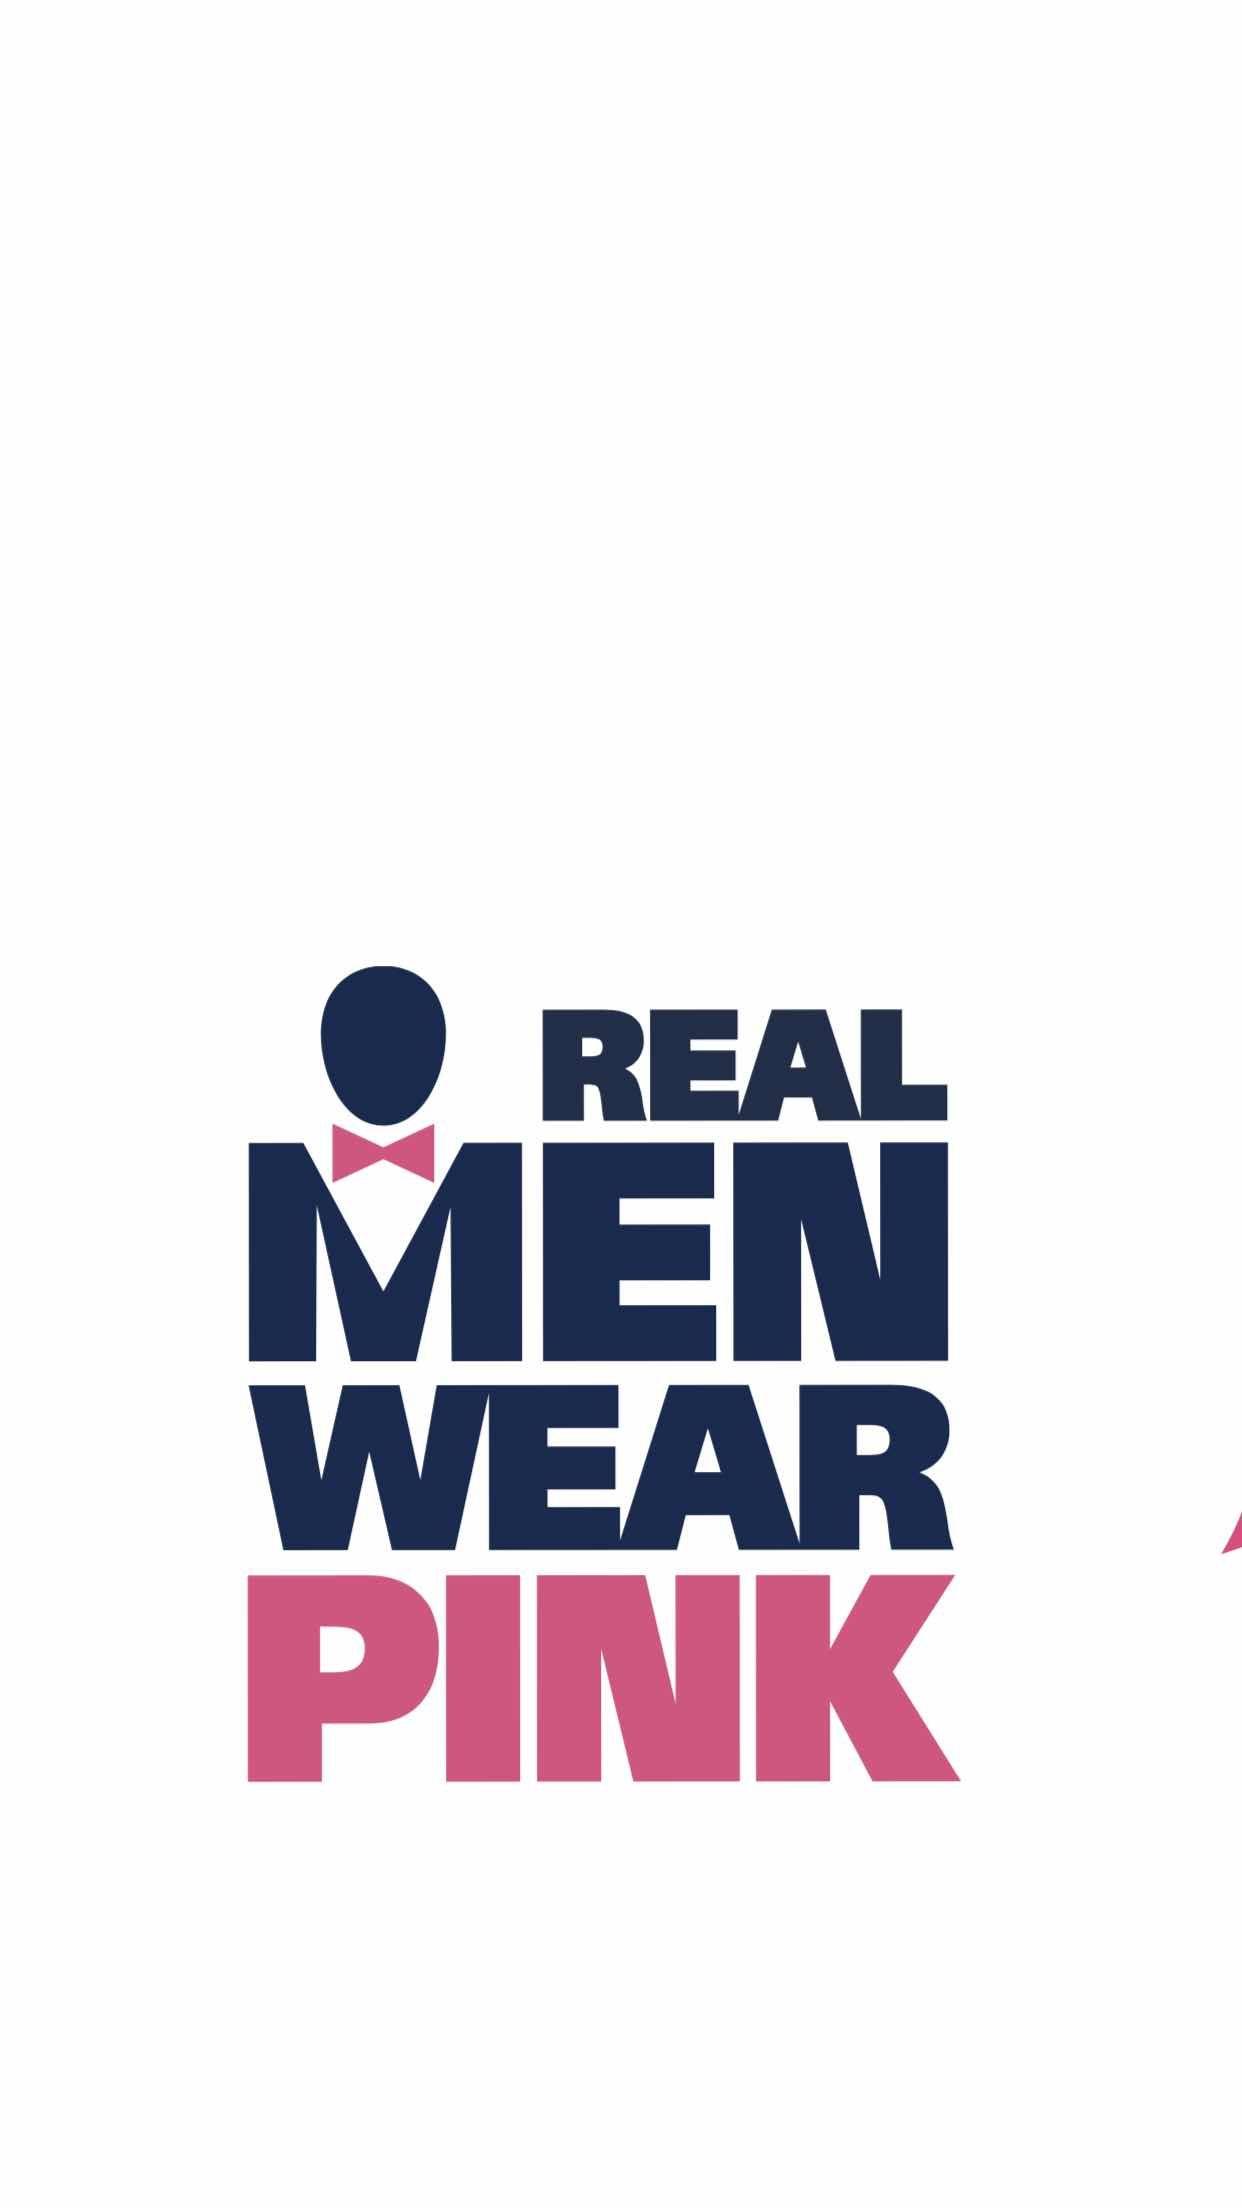 Wear Pink Logo - Real Men Wear Pink - Straight to the Point